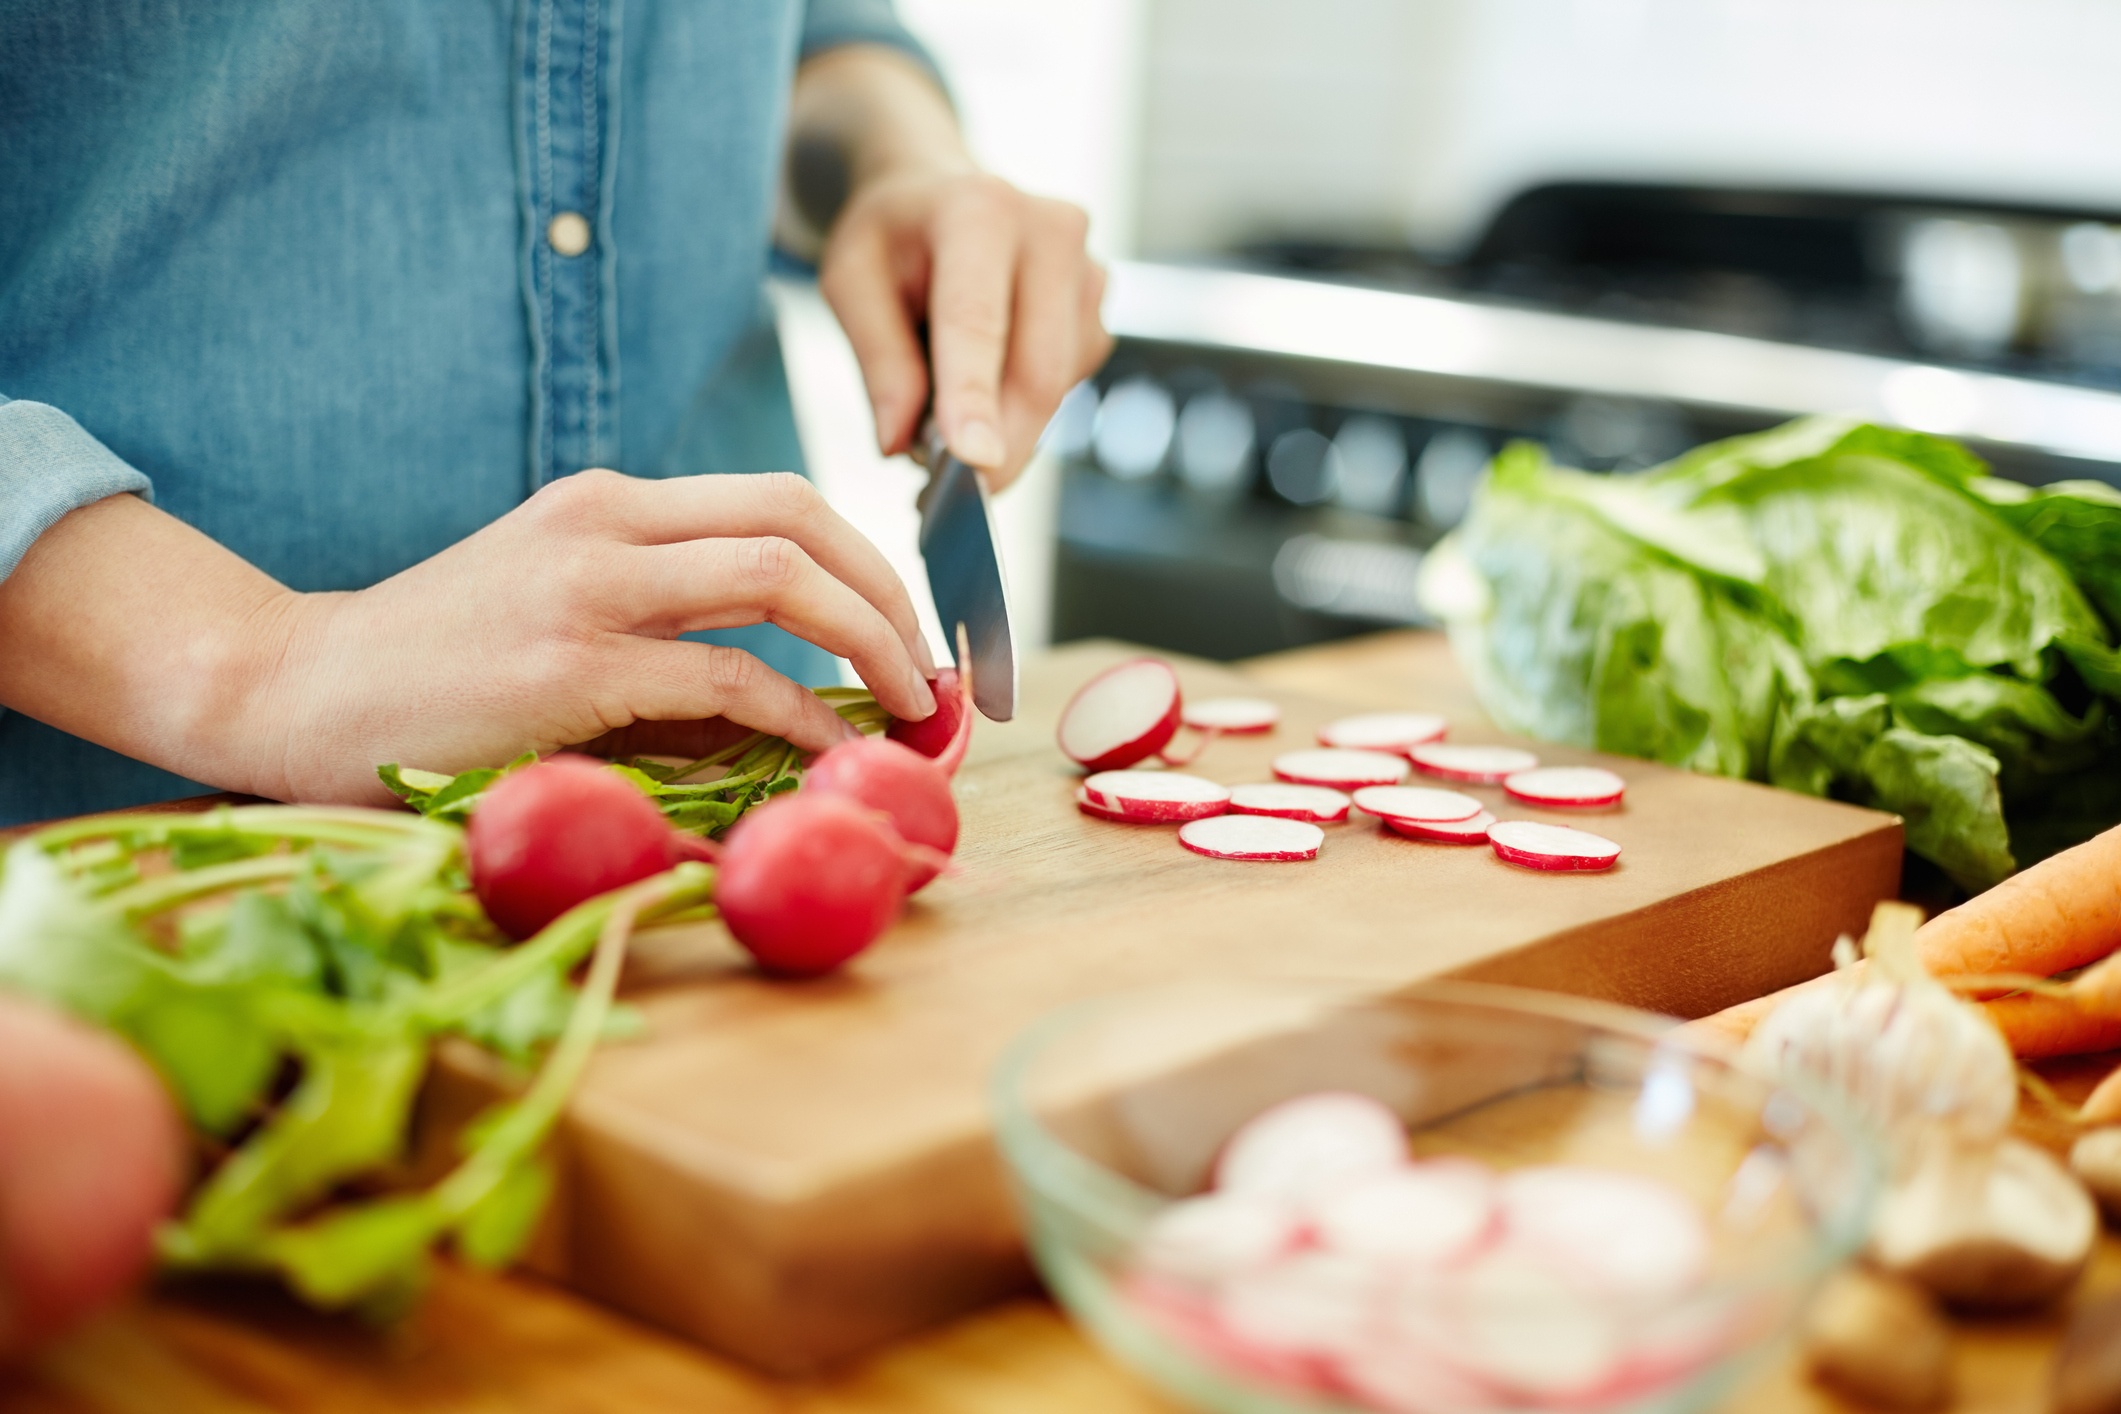 Woman chopping red radishes in the kitchen